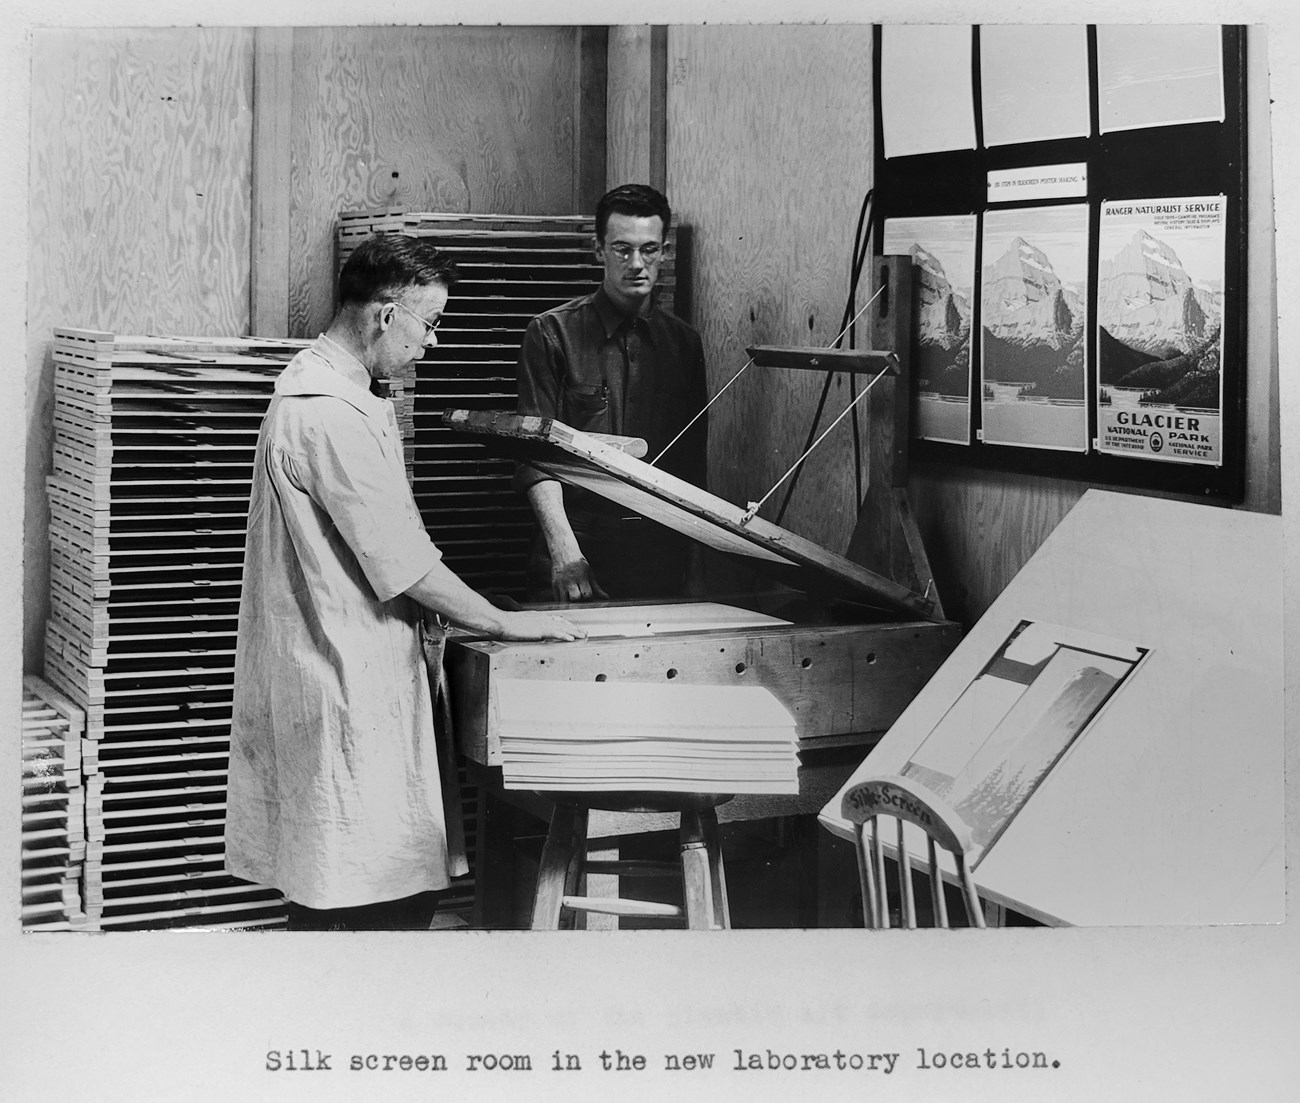 Don Powell demonstrates silkscreen printing to Dale Miller